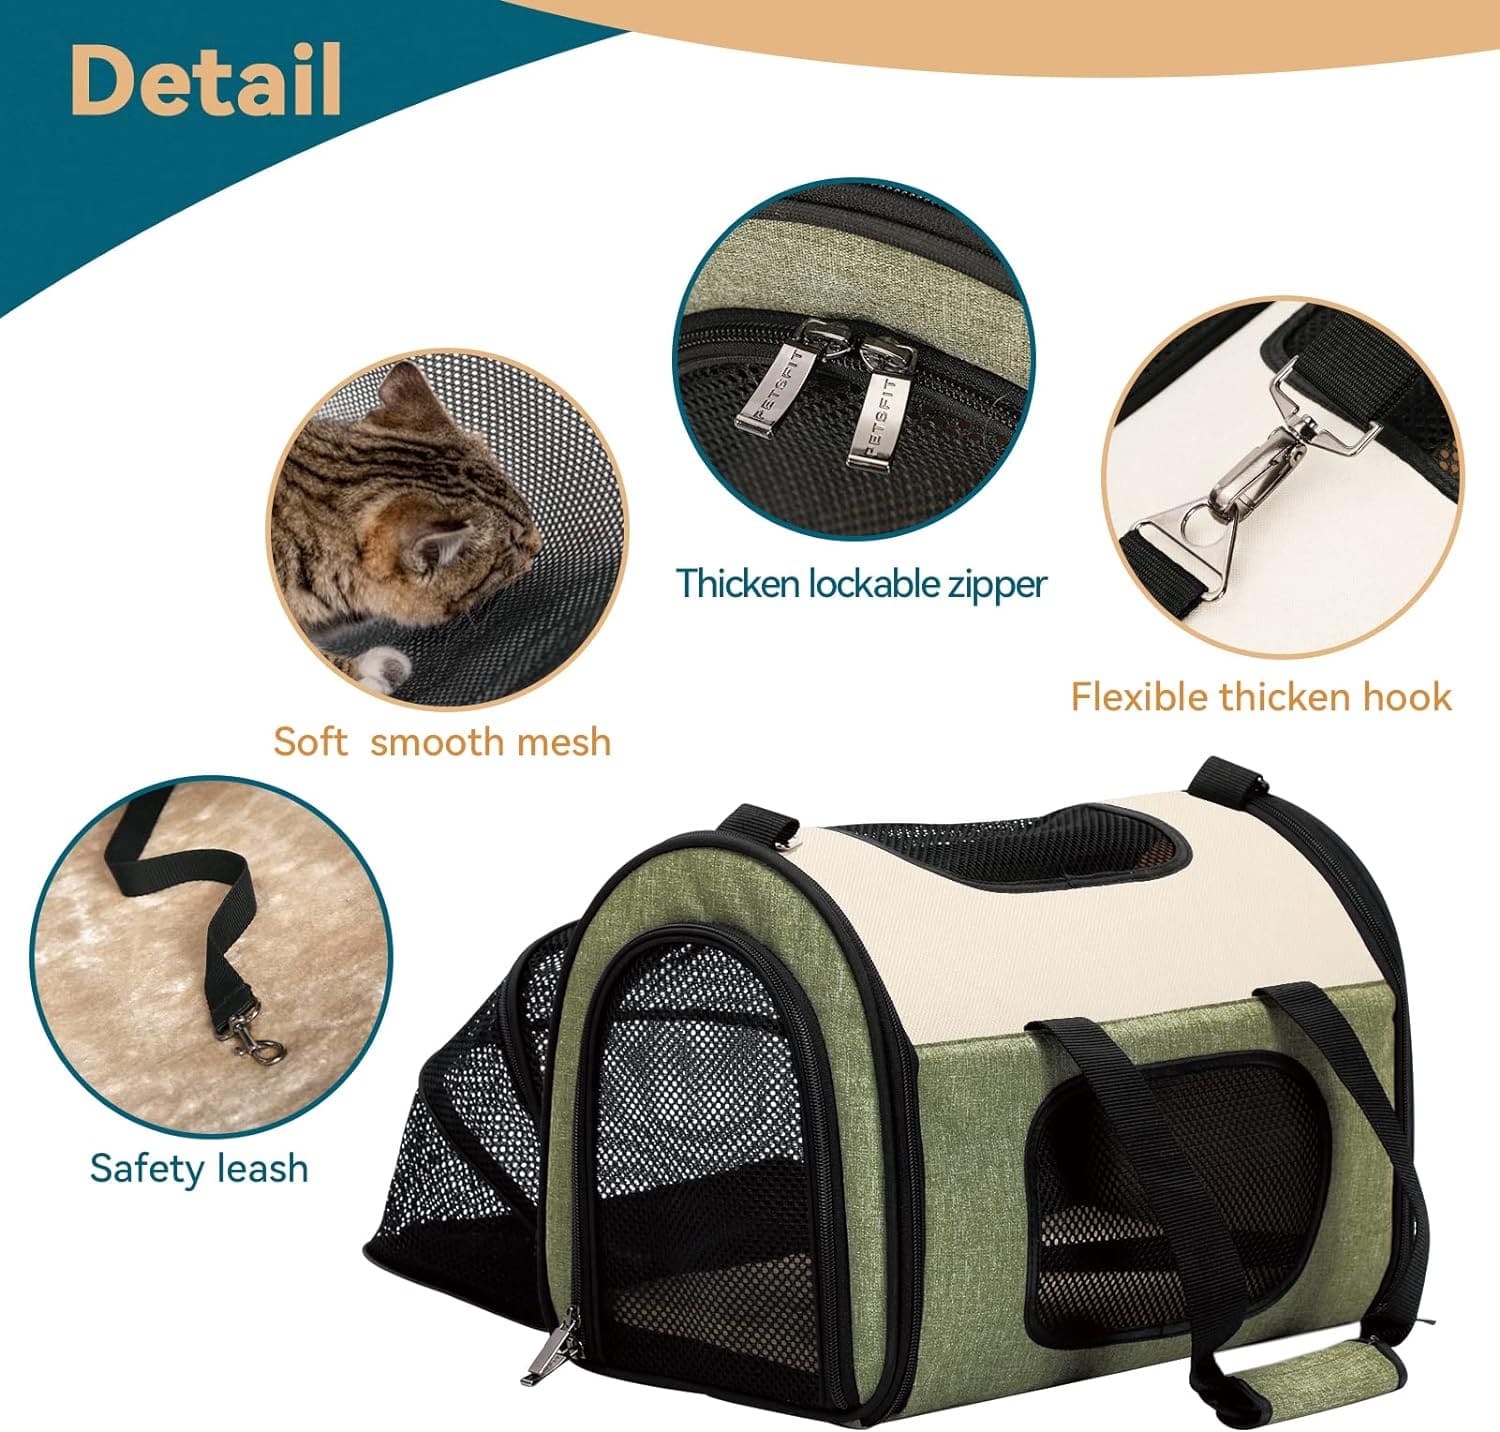 Petsfit Expandable Pet Carrier, Soft-Sided Collapsible Dog Carrier for Small Dog, Large Cat Carrier for 2 Cat